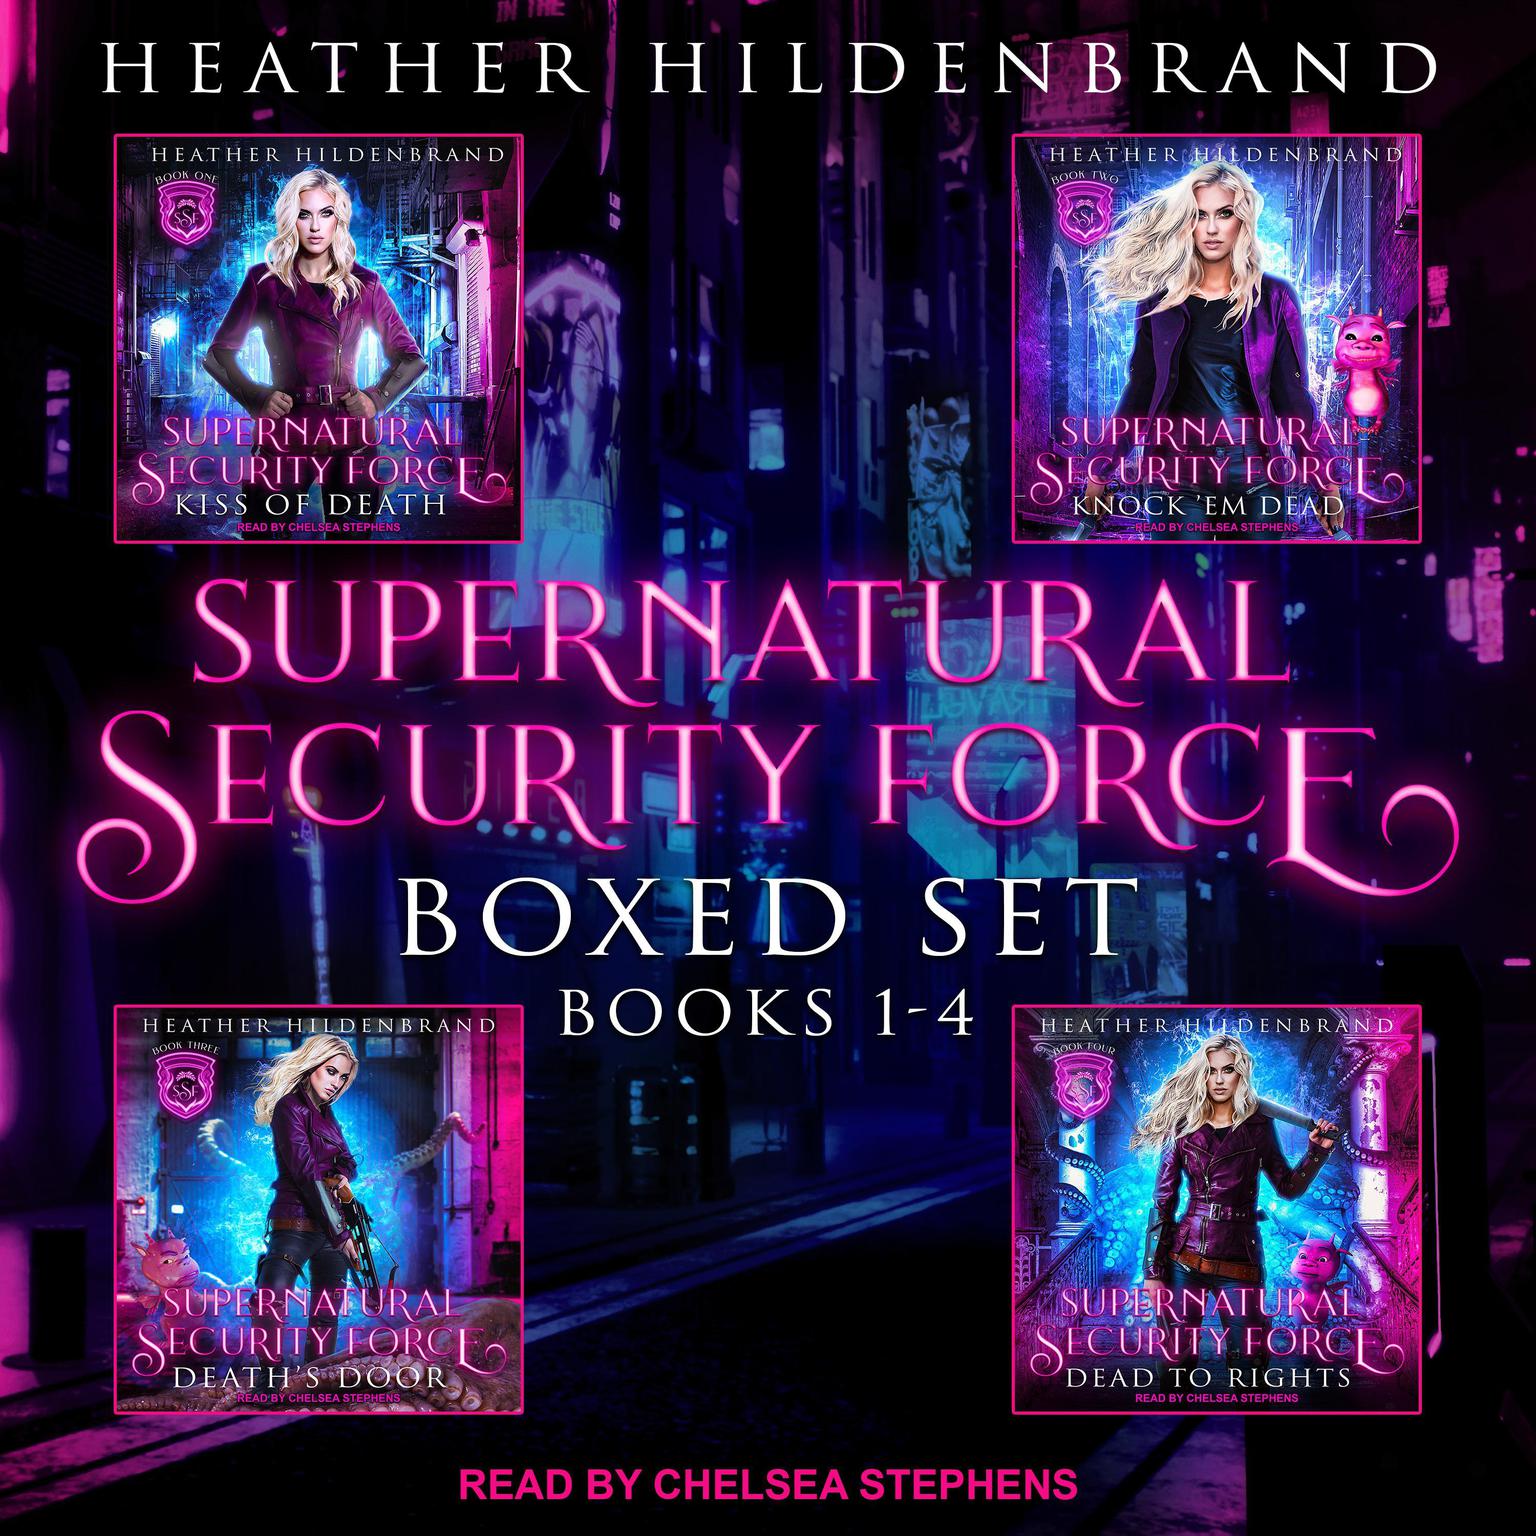 Supernatural Security Force Boxed Set: Books 1-4 Audiobook, by Heather Hildenbrand